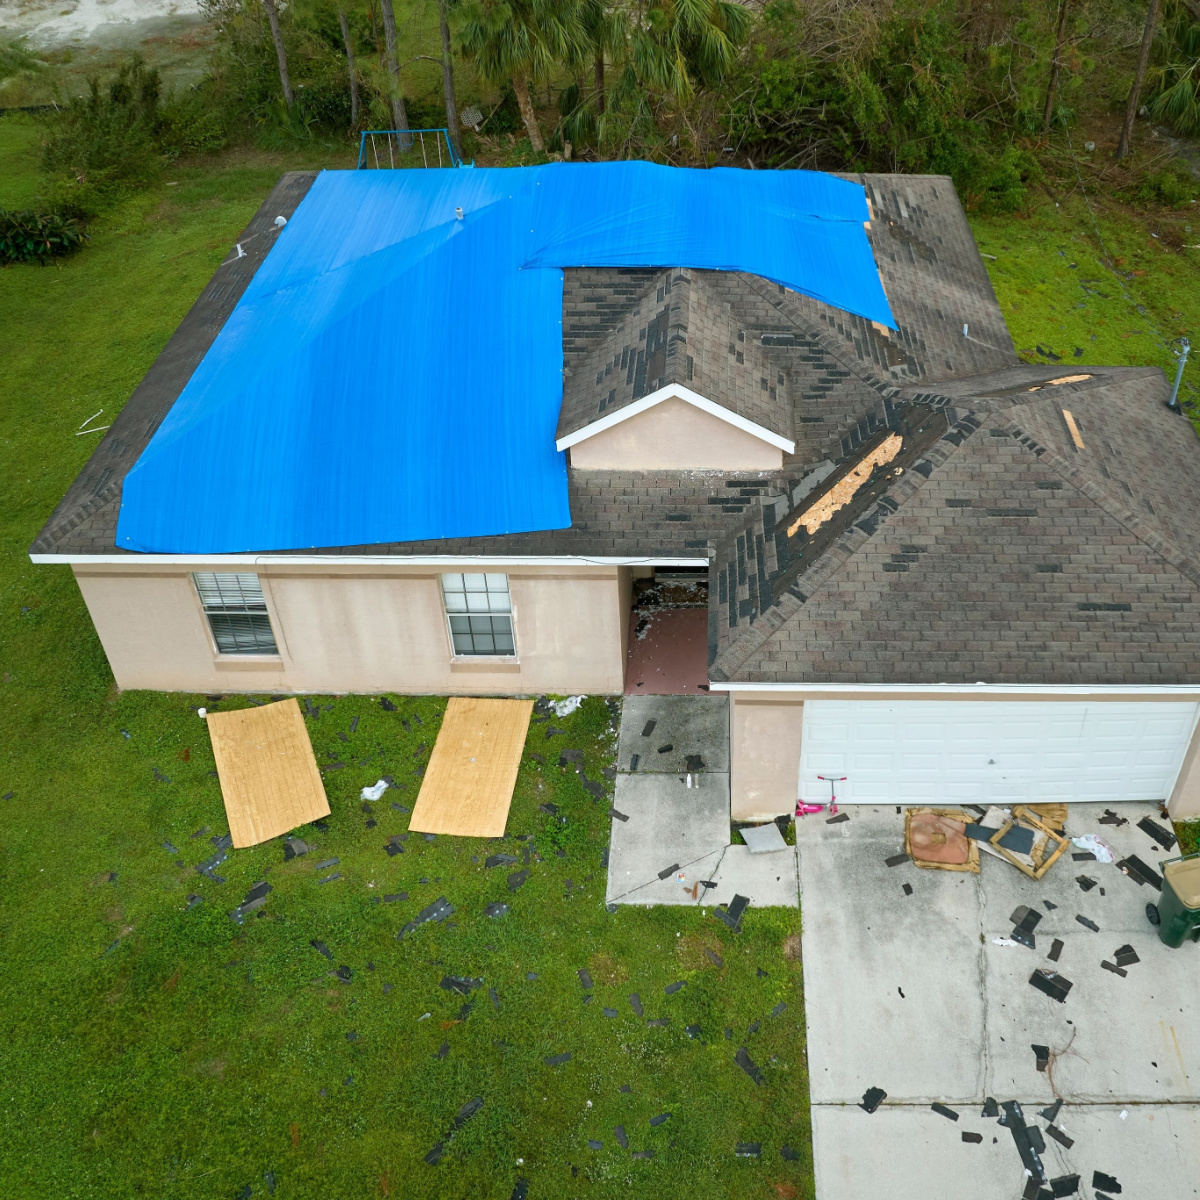 A home in need of a Houston Roof Replacement, which could be targeted by storm chasers or roofing scammers.